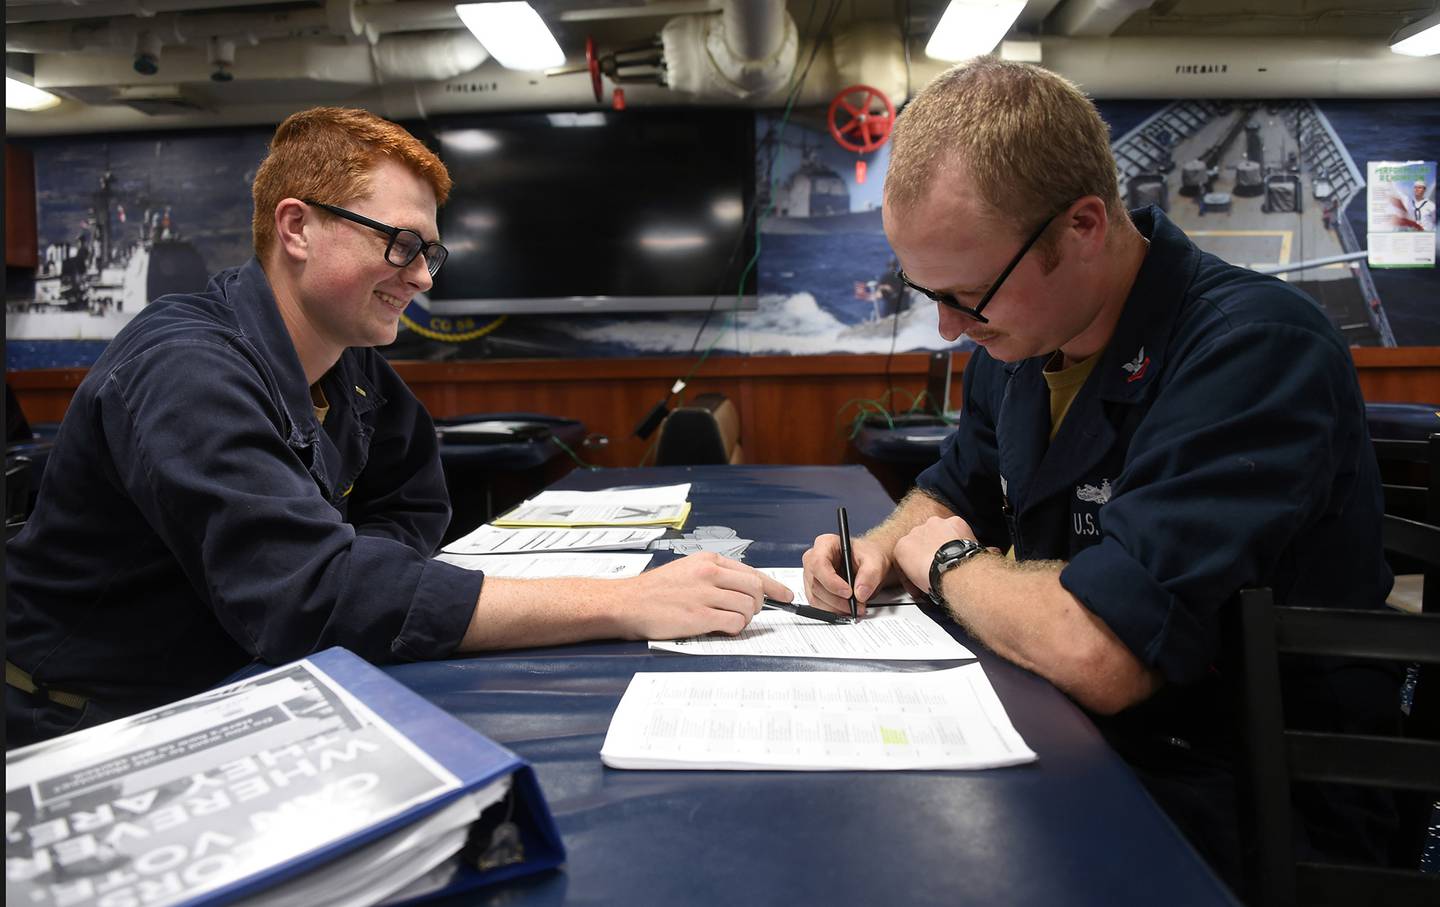 Unit Voting Assistance Officer Ensign Samuel Straub, left, assists Fire Controlman 2nd Class William Vaughn on absentee voting paperwork aboard the mess decks of the Ticonderoga-class guided-missile cruiser USS Philippine Sea (CG 58), Aug. 29, 2020.